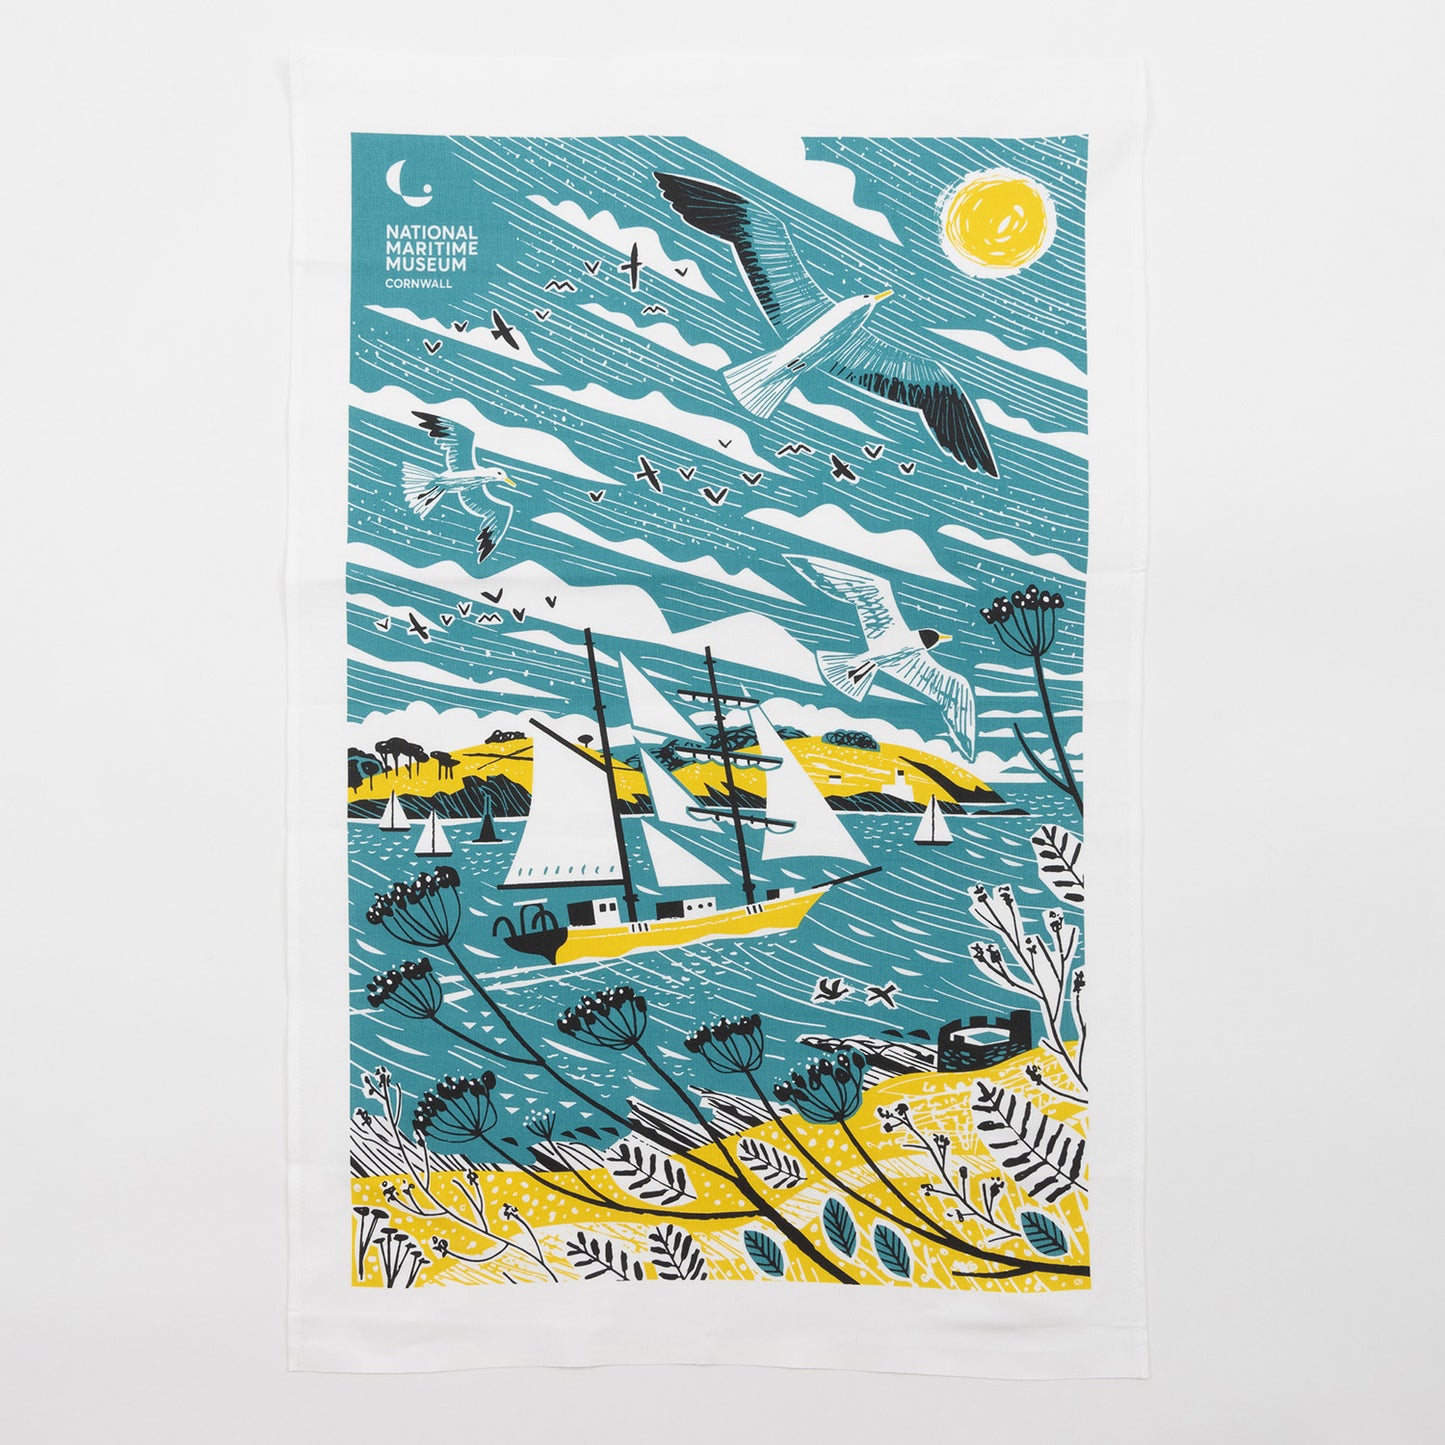 Tall ships teal towel with an illustration of a tall ship in blue, white and yellow. The tea towel is against a white background.